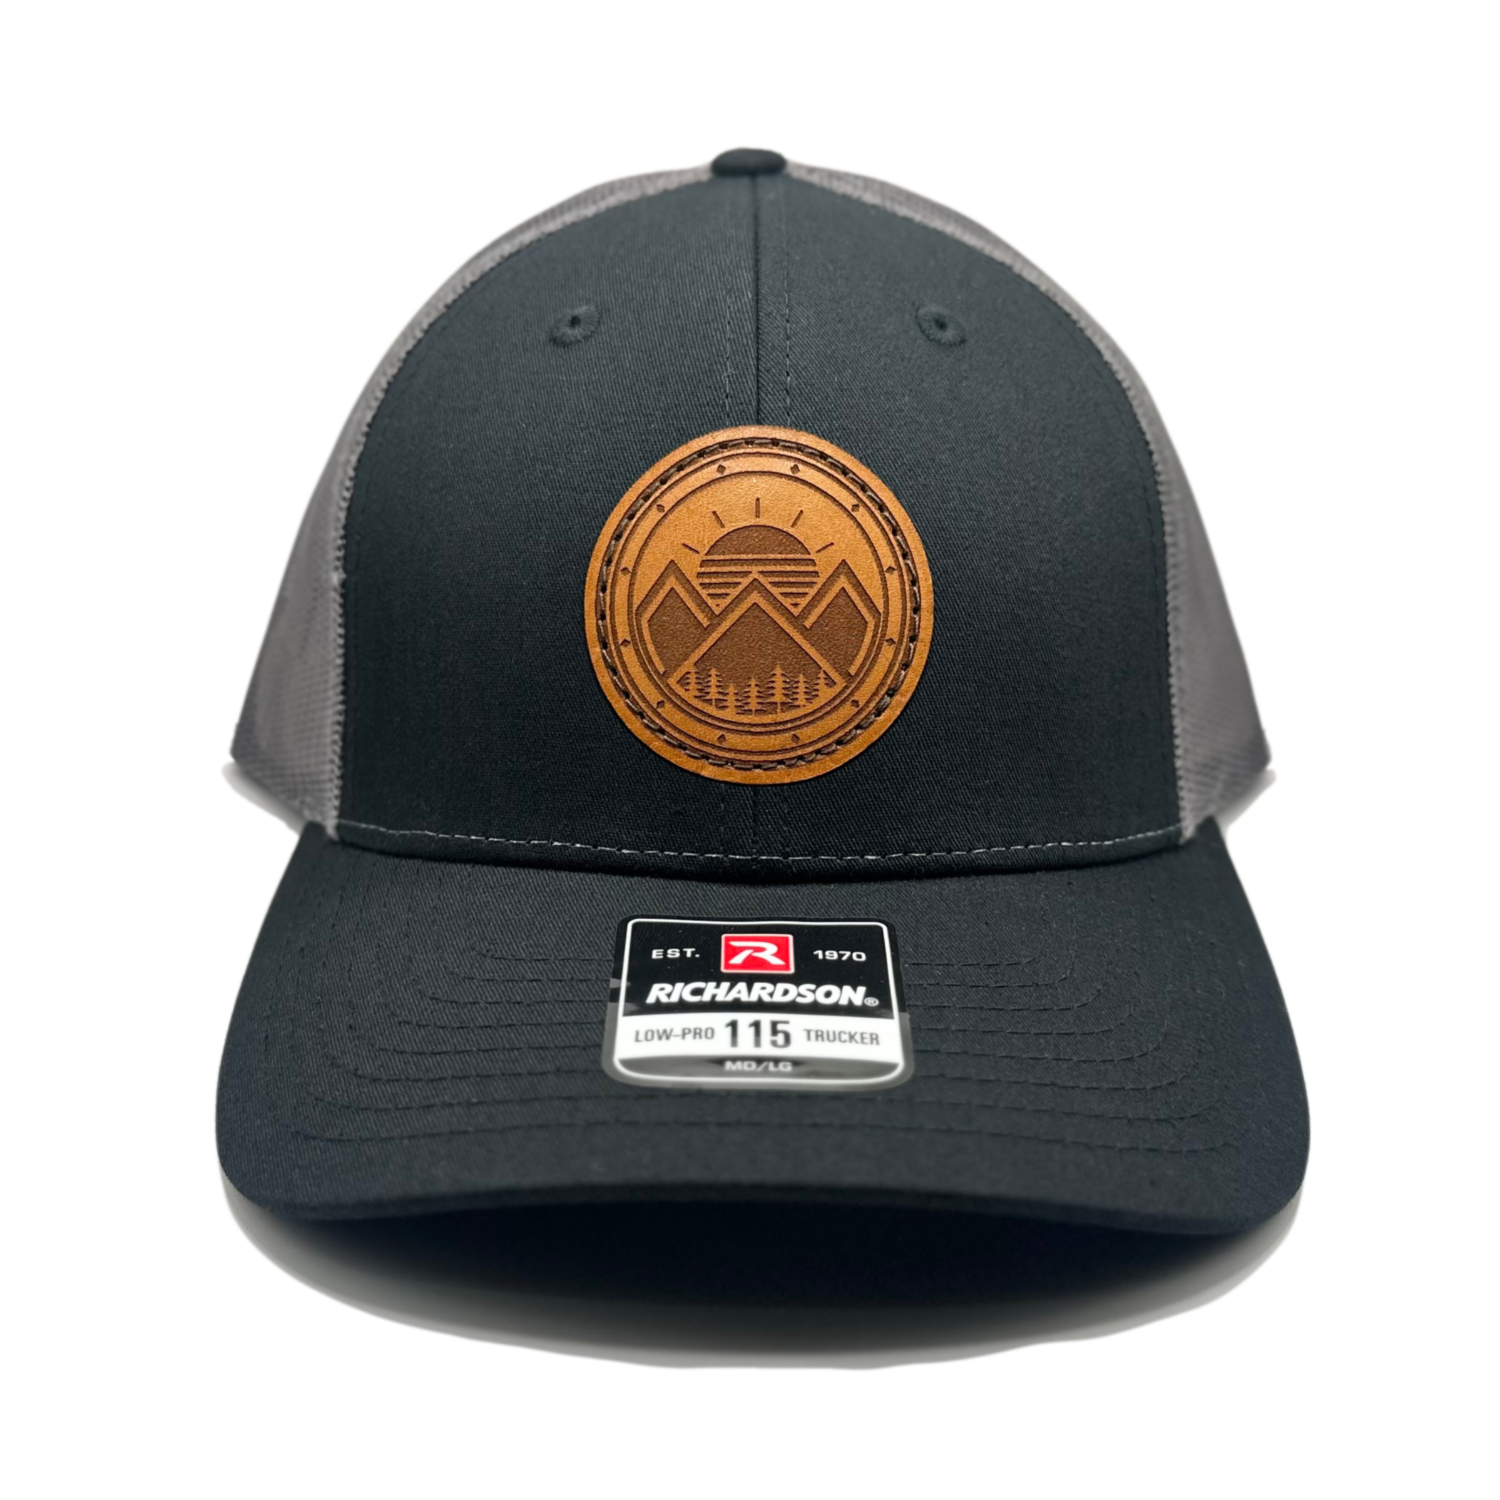 A unique leather patch hat named Modern Mountains, showcasing a design with 3 mountain peaks, a sunrise, pine trees, and decorative border on a circular patch. Crafted in the USA, this authentic leather patch is skillfully sewn onto a Richardson 115 low profile SnapBack hat. Available in small and m/l sizes in the Richardson 115 style, and in multiple colors on the Richardson 112. Inspired by the majestic mountains of Colorado, this hat is perfect for those who appreciate high-quality leather patch designs.